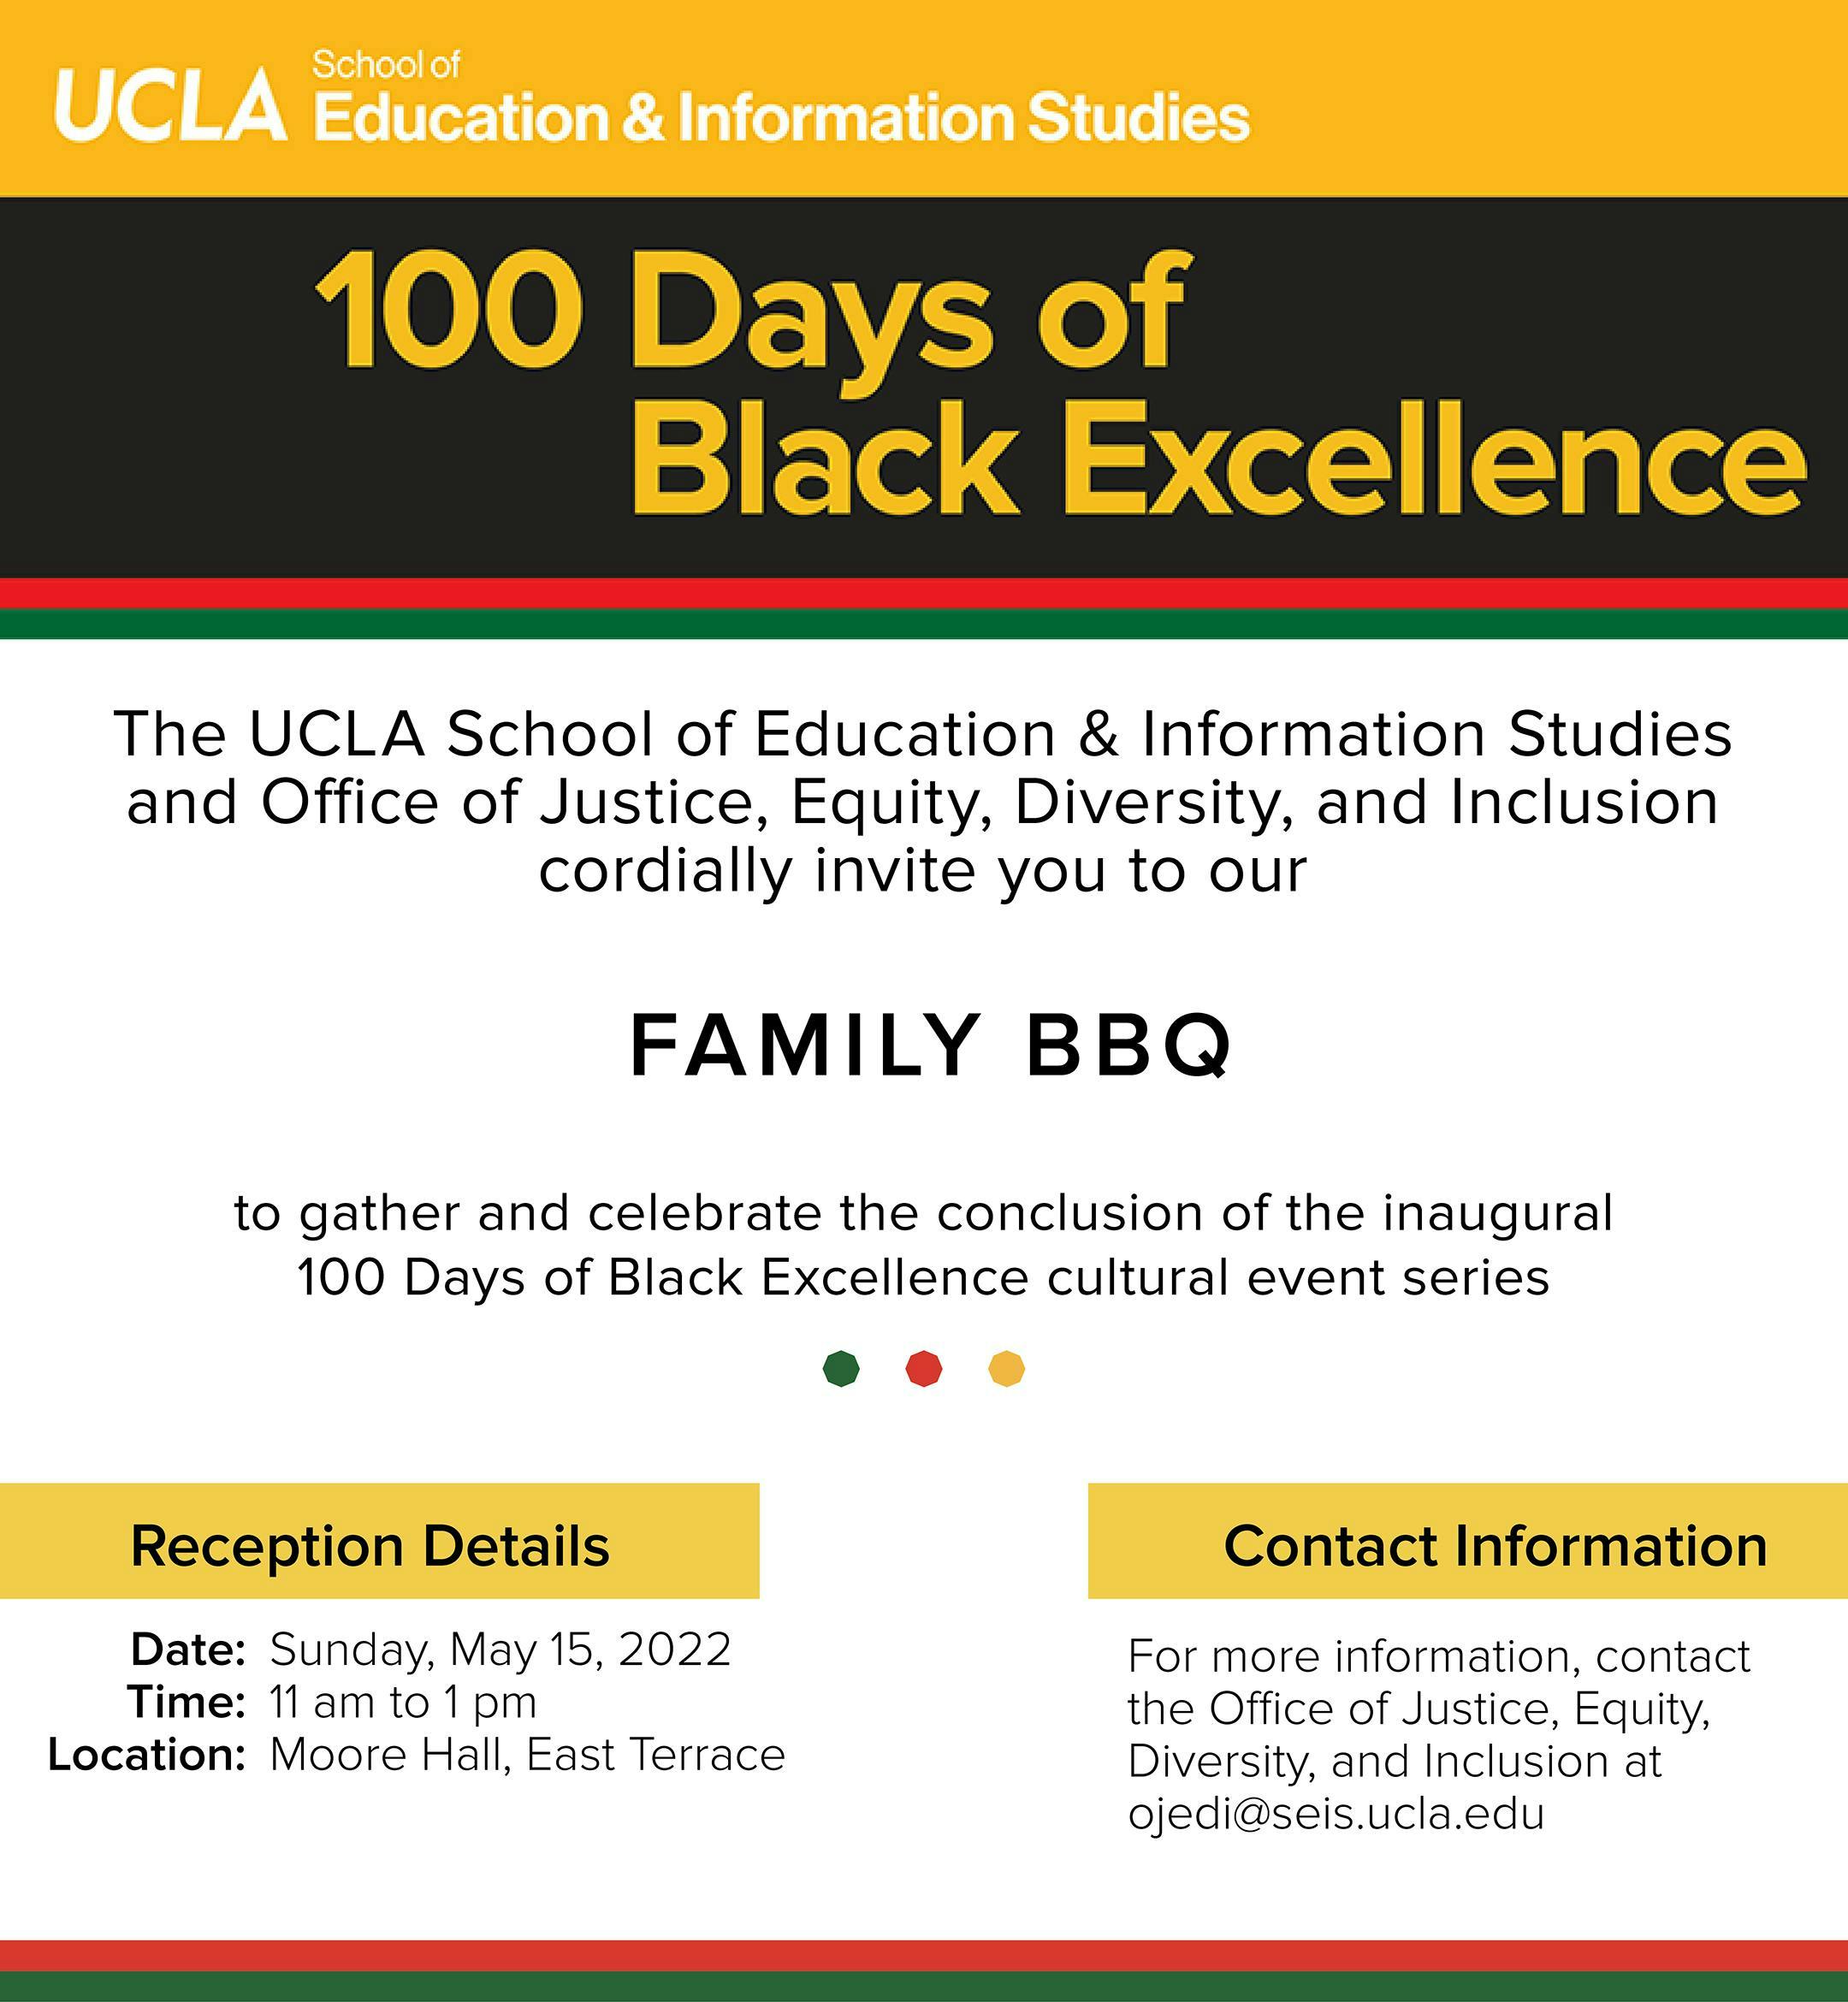 100 Days of Black Excellence Family BBQ on Sunday, May 15, 2022 at 11am on the Moore Hall East Terrace